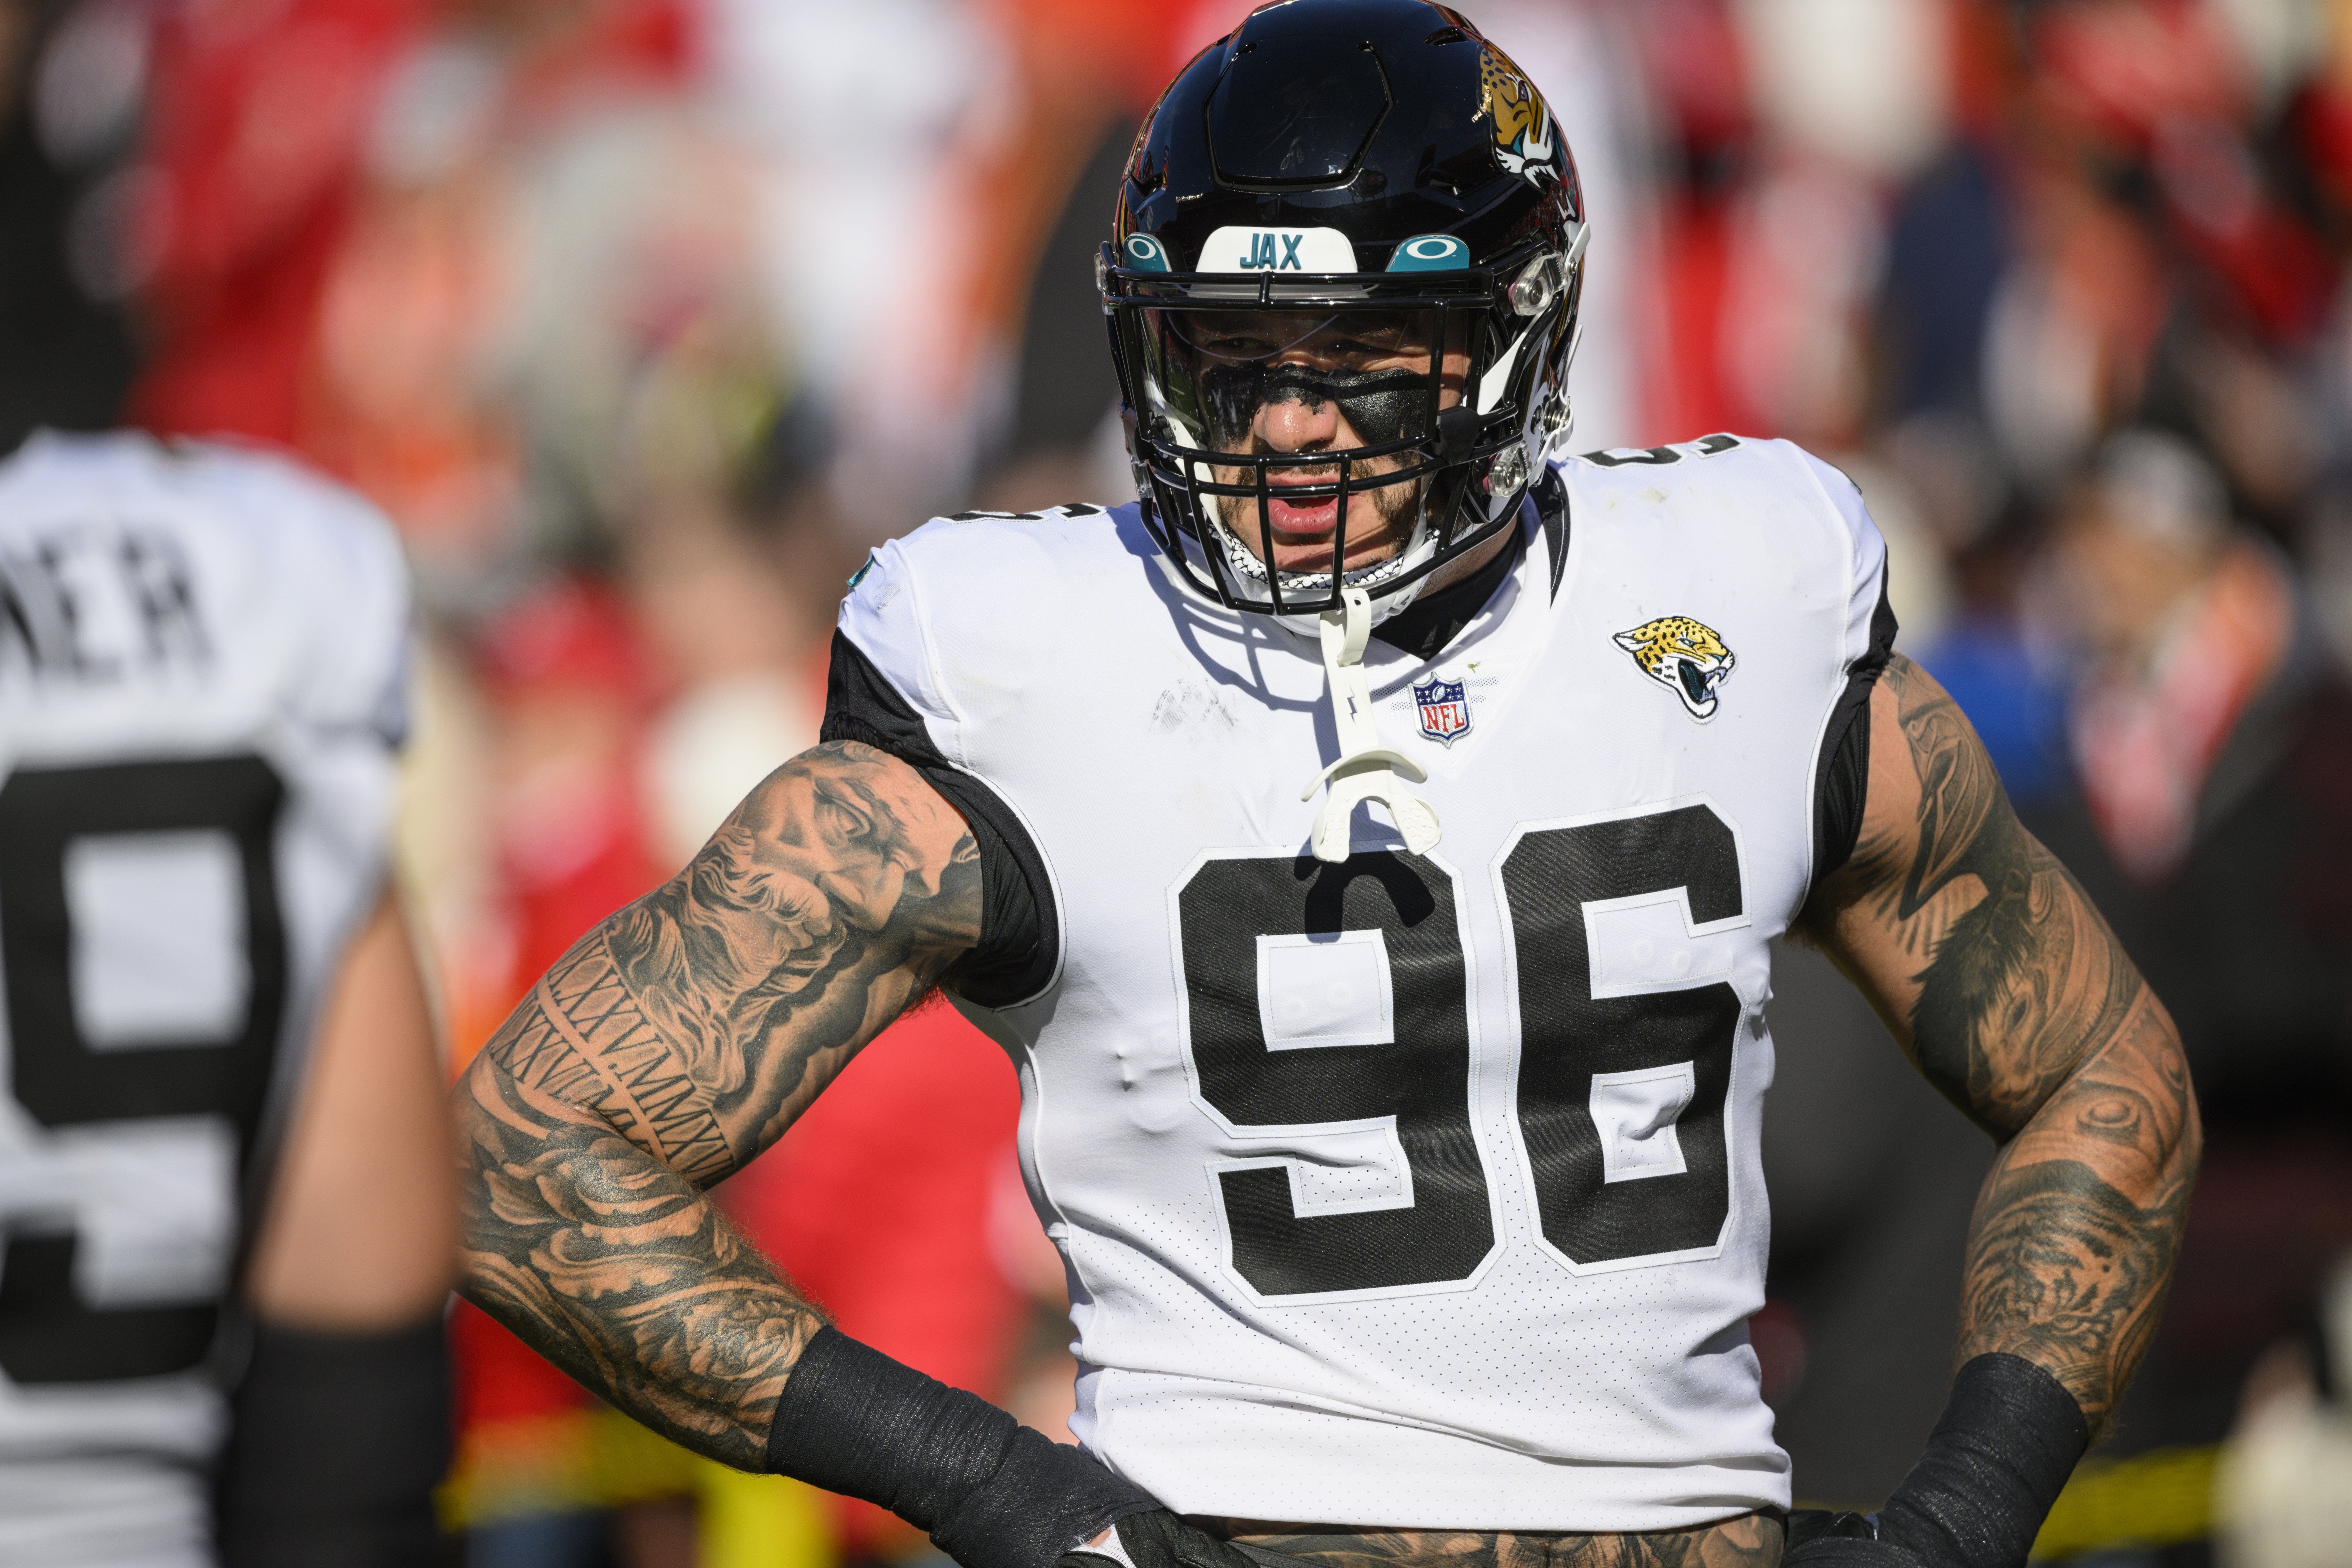 f88f6e6d-23ef-4c5c-98b1-bd43245d2015-Jaguars_Chiefs_Football_7 DL Adam Gotsis set to return to Jaguars on two-year deal